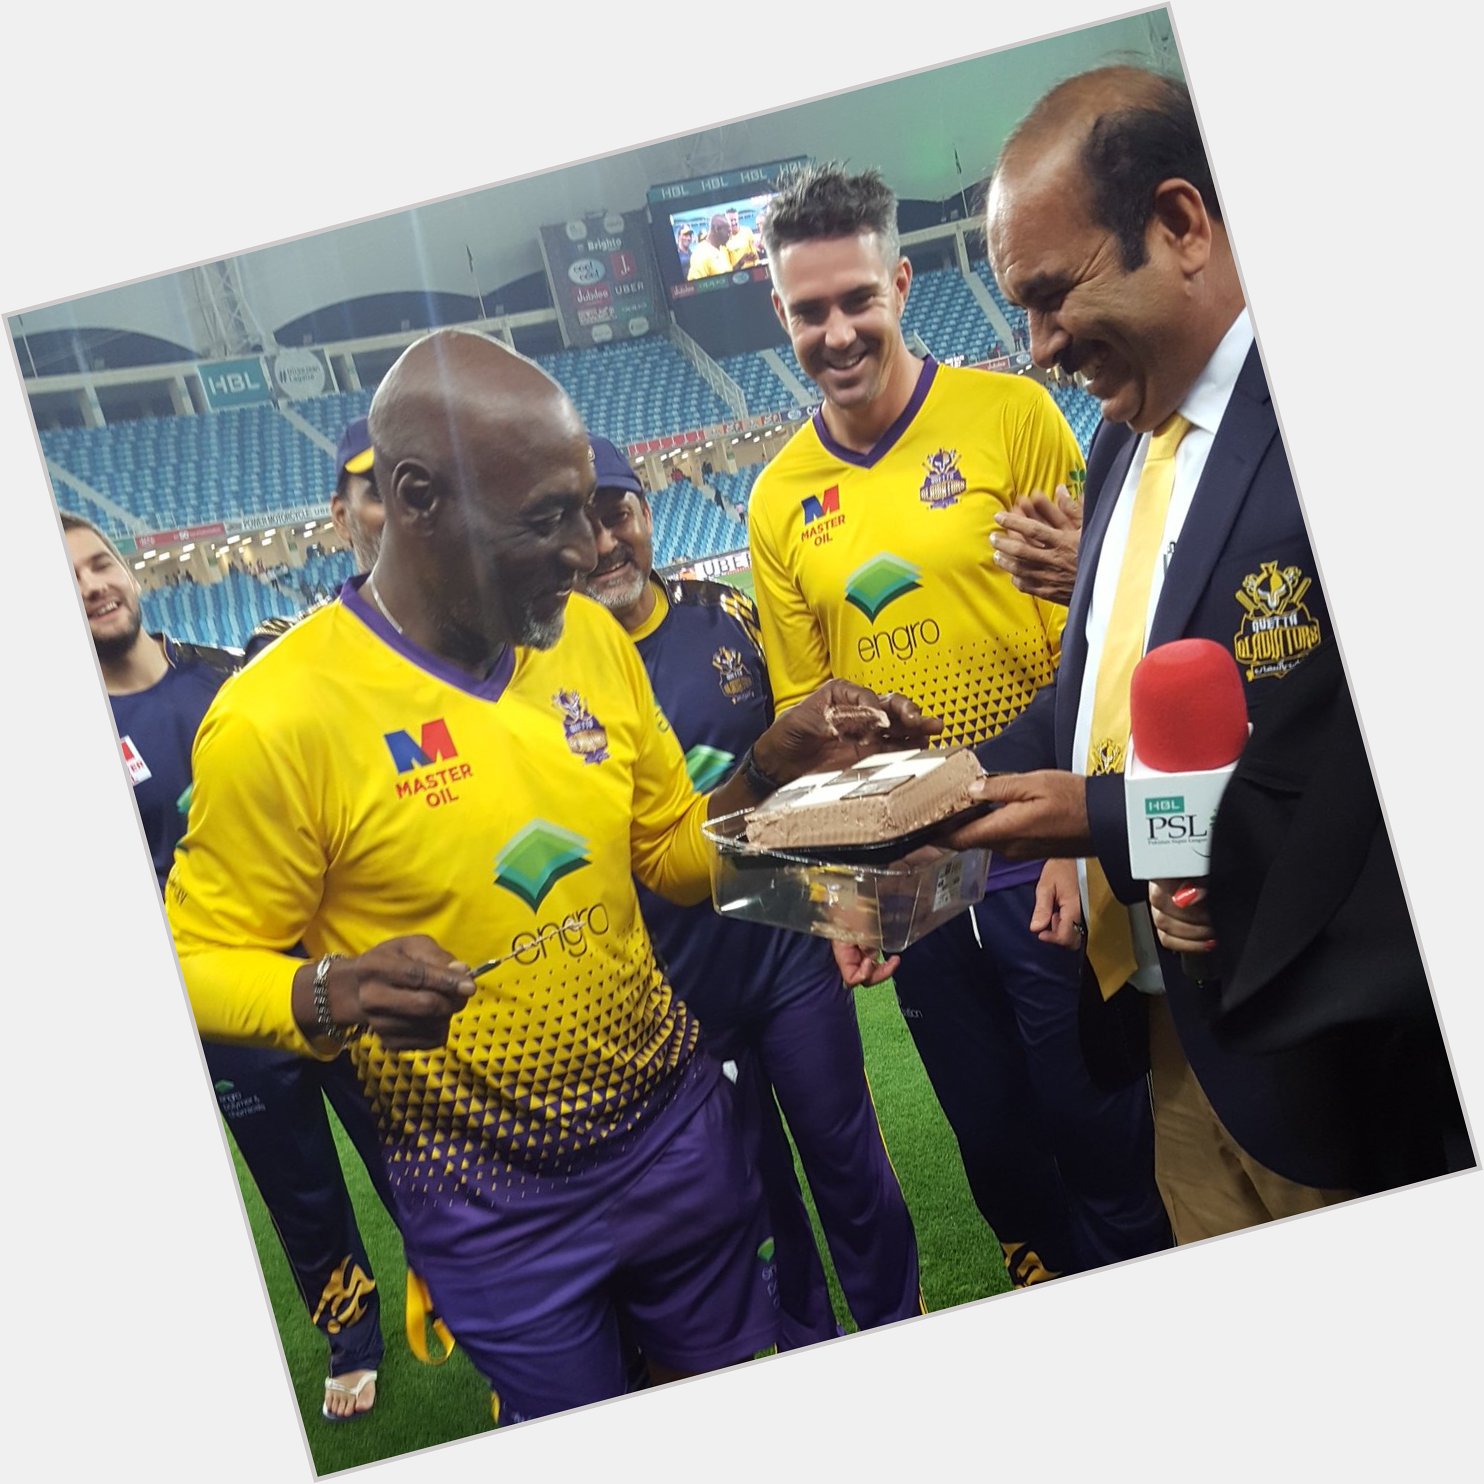 Happy Birthday Sir Viv Richards. This cake must taste sweeter now after such a thrilling win  